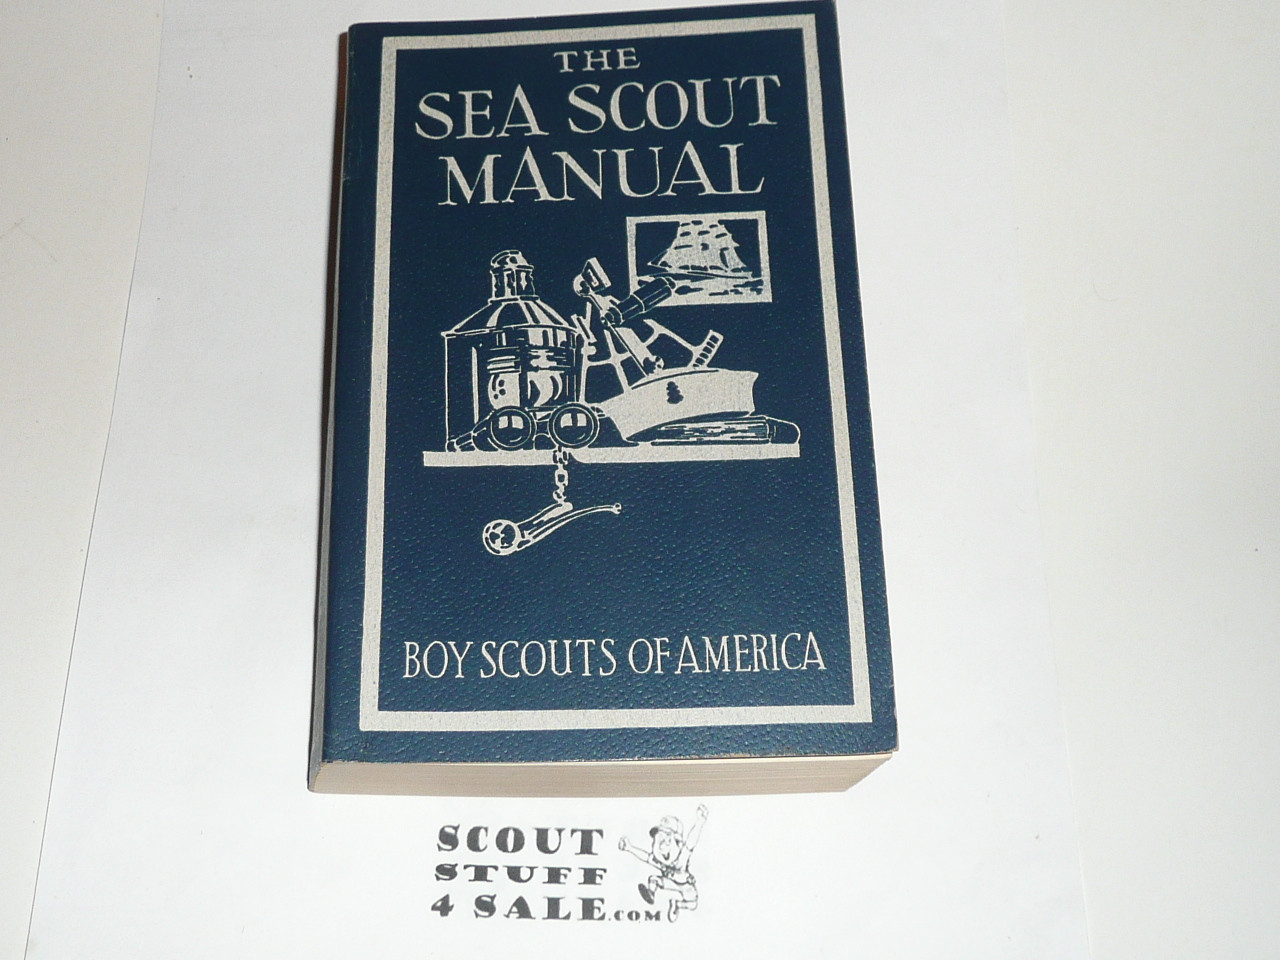 1944 The Sea Scout Manual, Sixth Edition, Fifth Printing March 1944